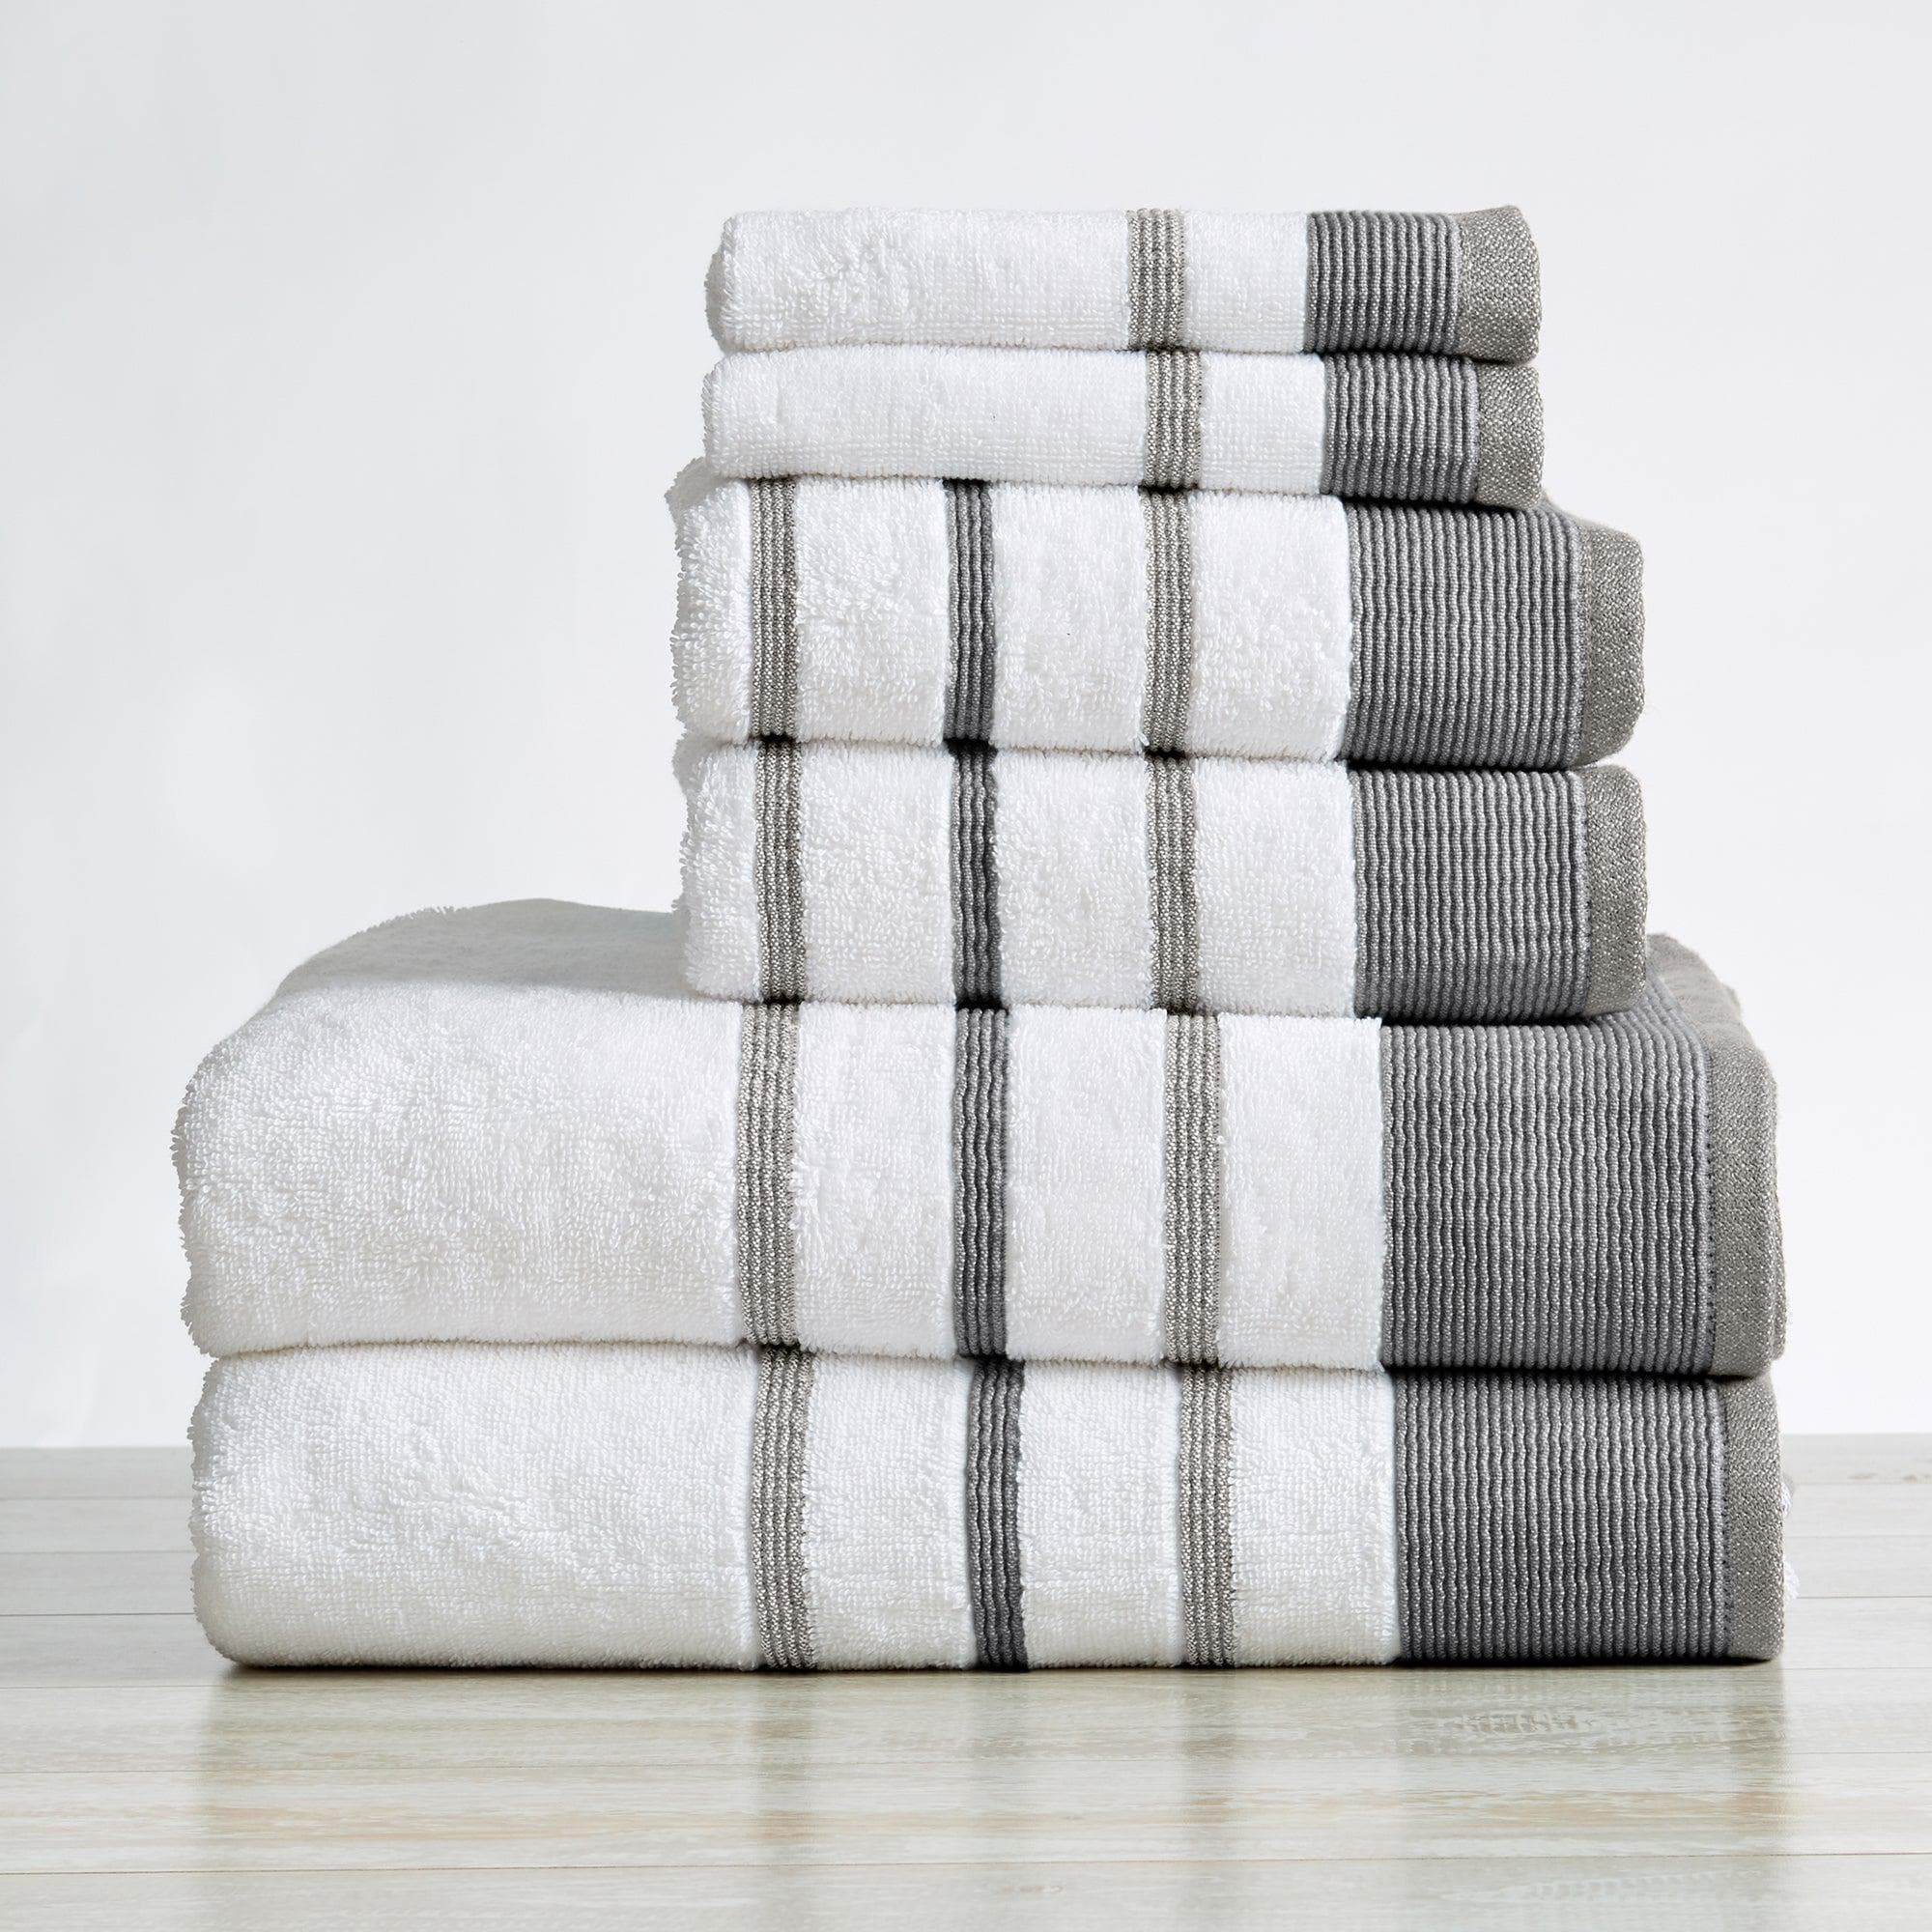 Bath Towels 100% Terry Cotton Tan, 4 Pack Bath Towel Set, Oeko-Tex Terry  Cotton Bathroom Towels, Soft and Absorbent Bathroom Towels Set, 30 in x 54  in